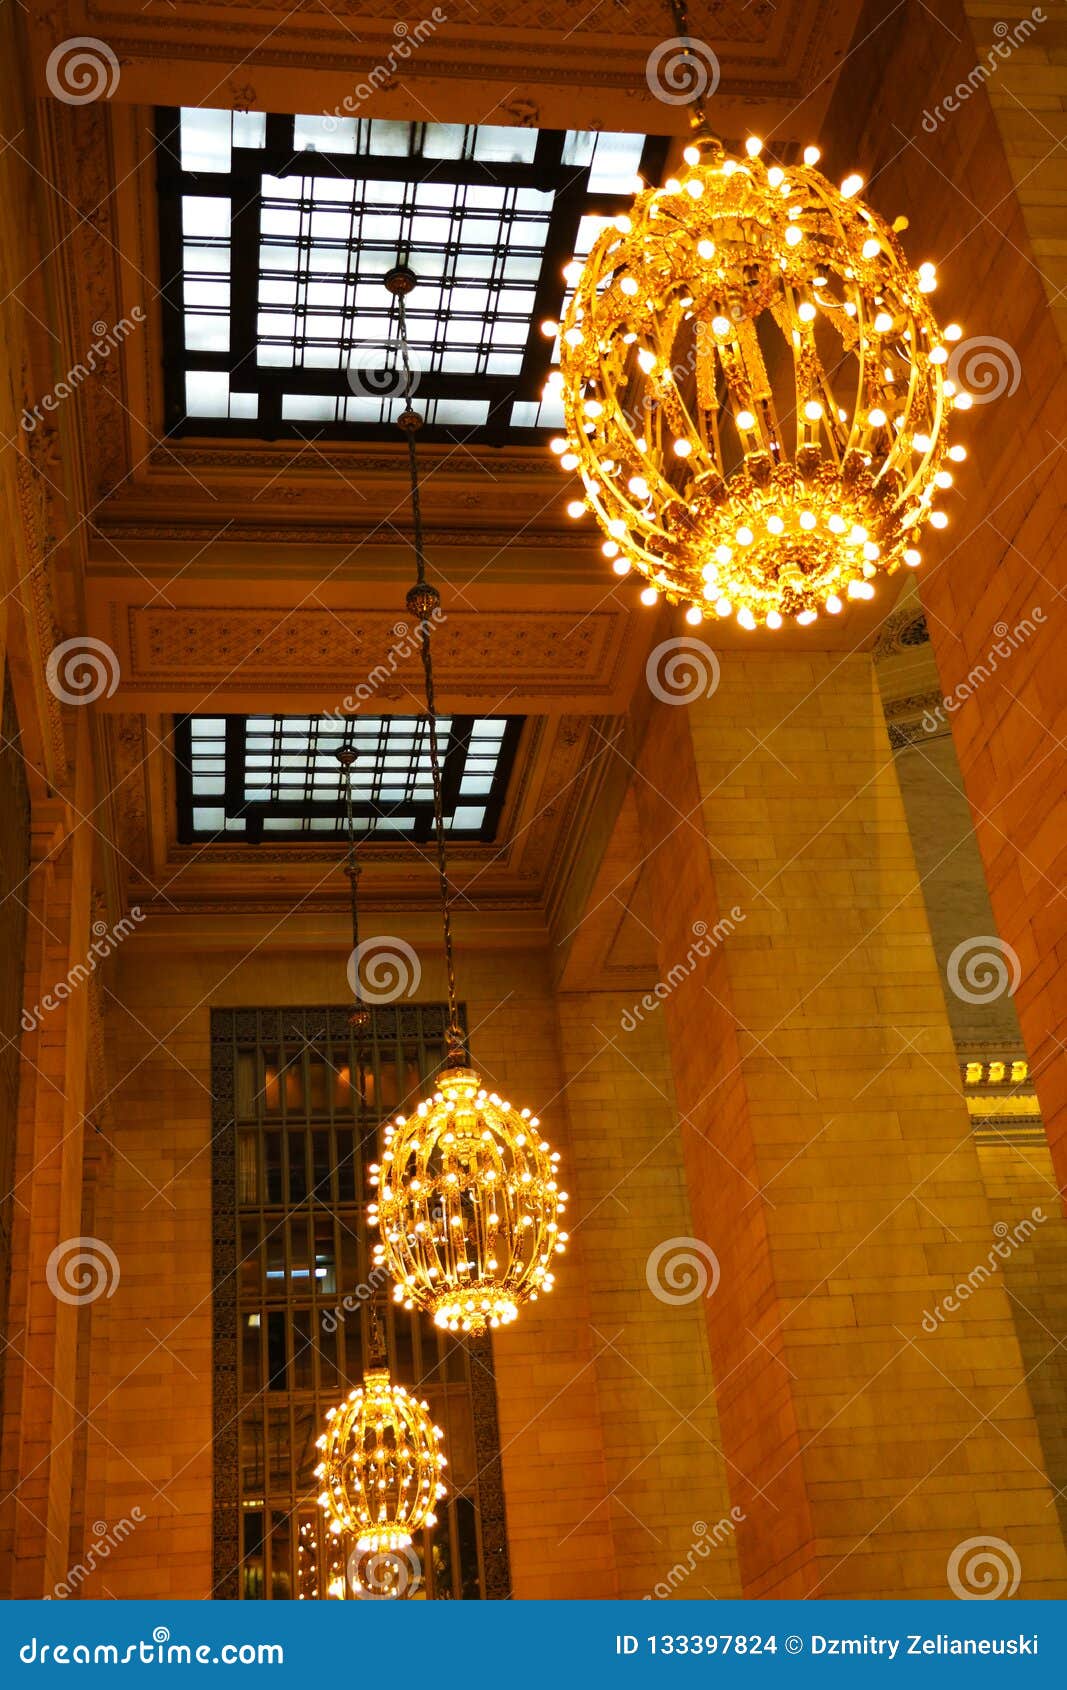 New York August 26 2018 Chandelier On The Ceiling Of